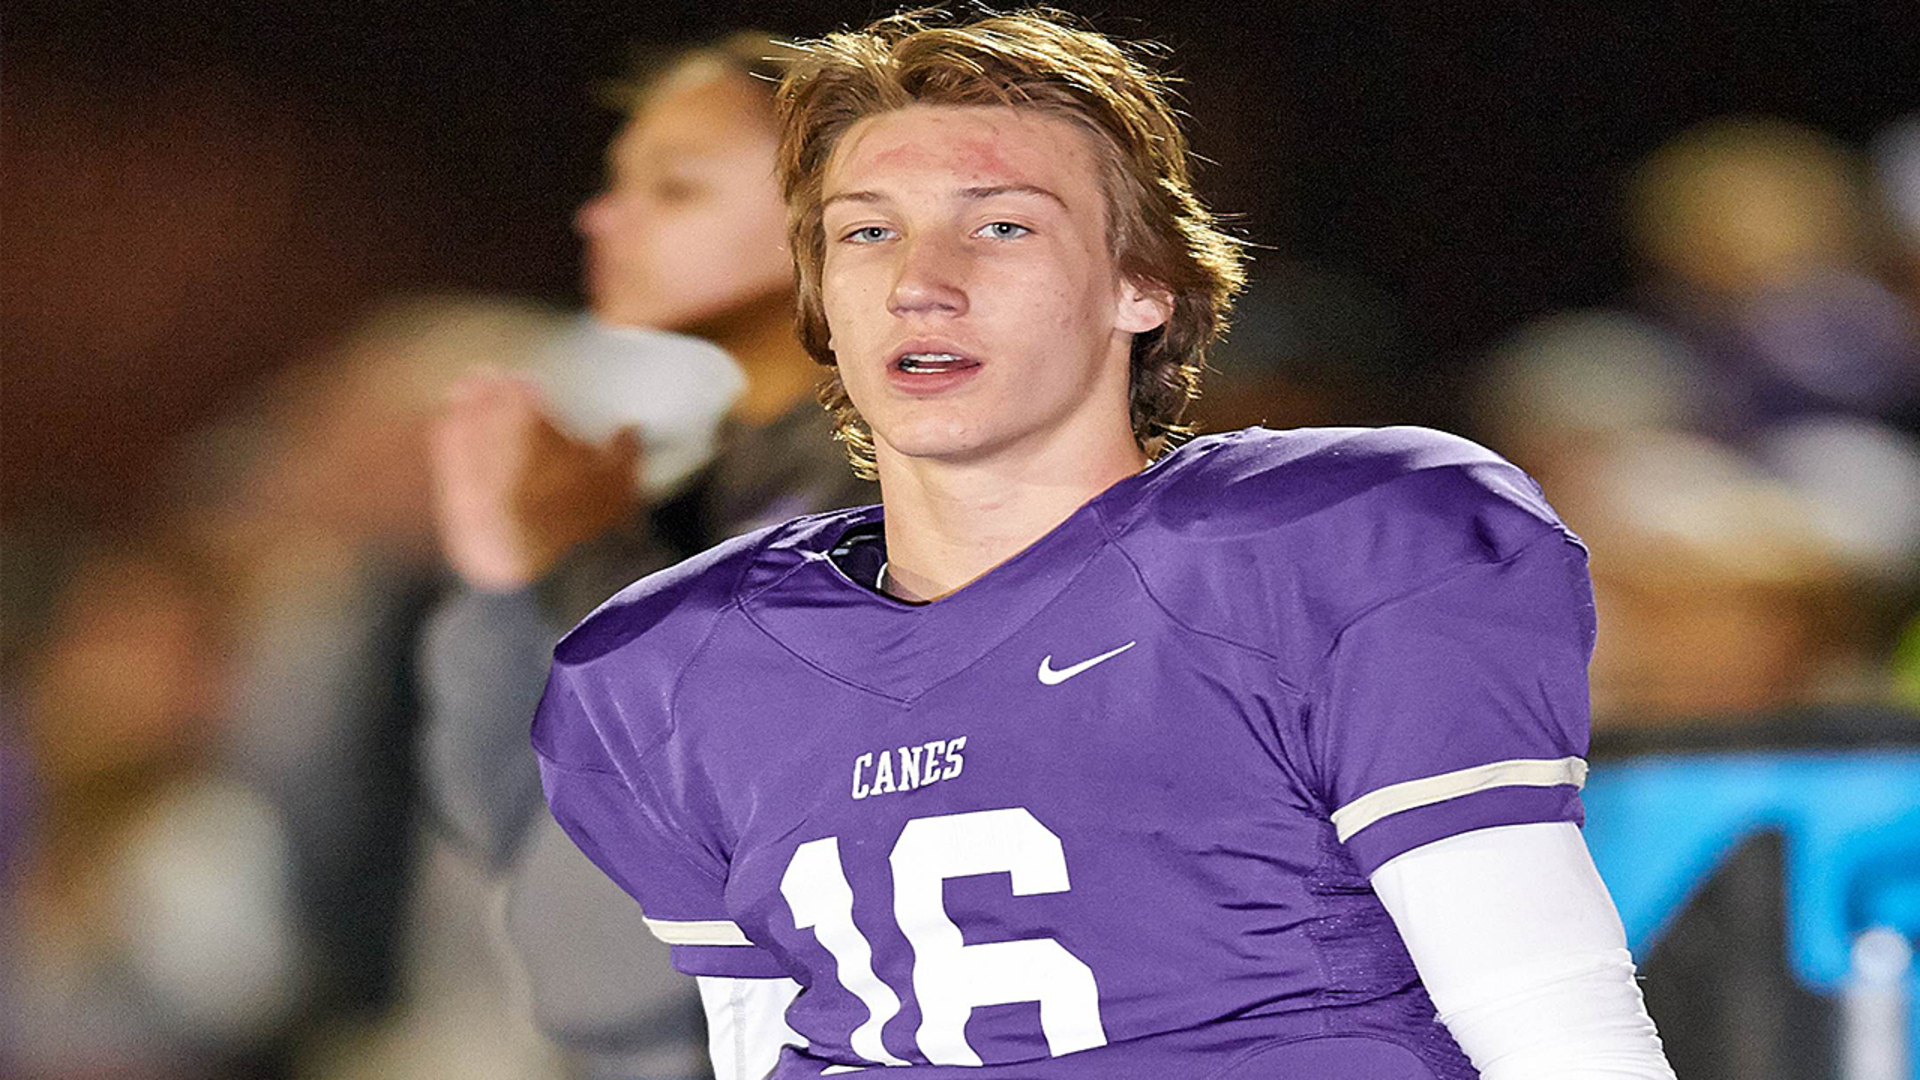 Cartersville HS Football Video "Trevor Lawrence during his high school